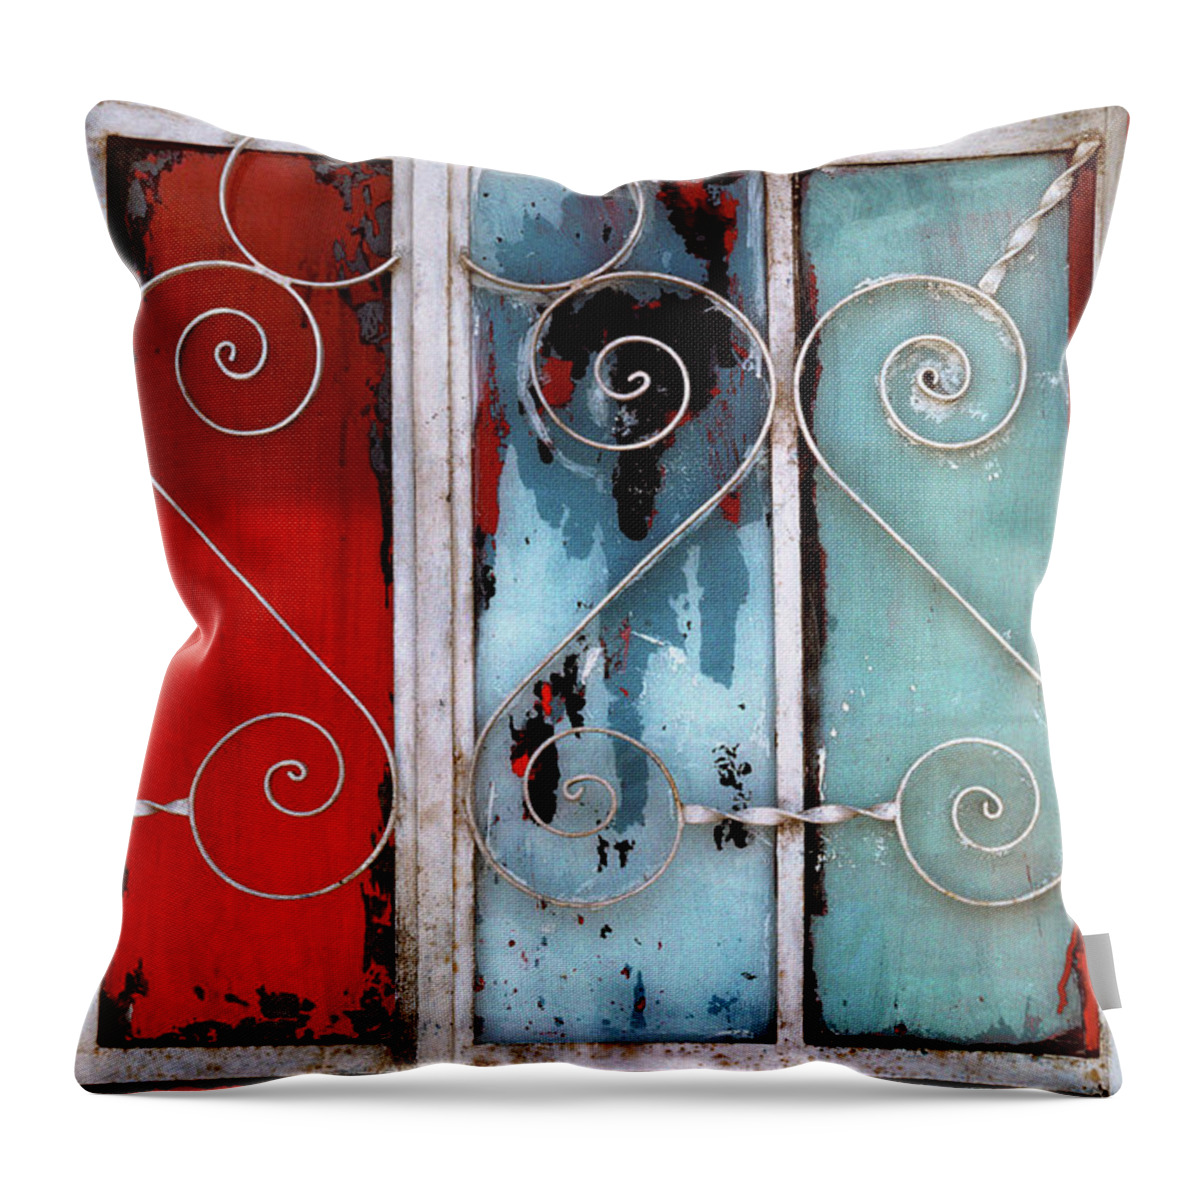 Mexico Throw Pillow featuring the photograph Mexico photos - Red White and Blue Door by Sharon Hudson